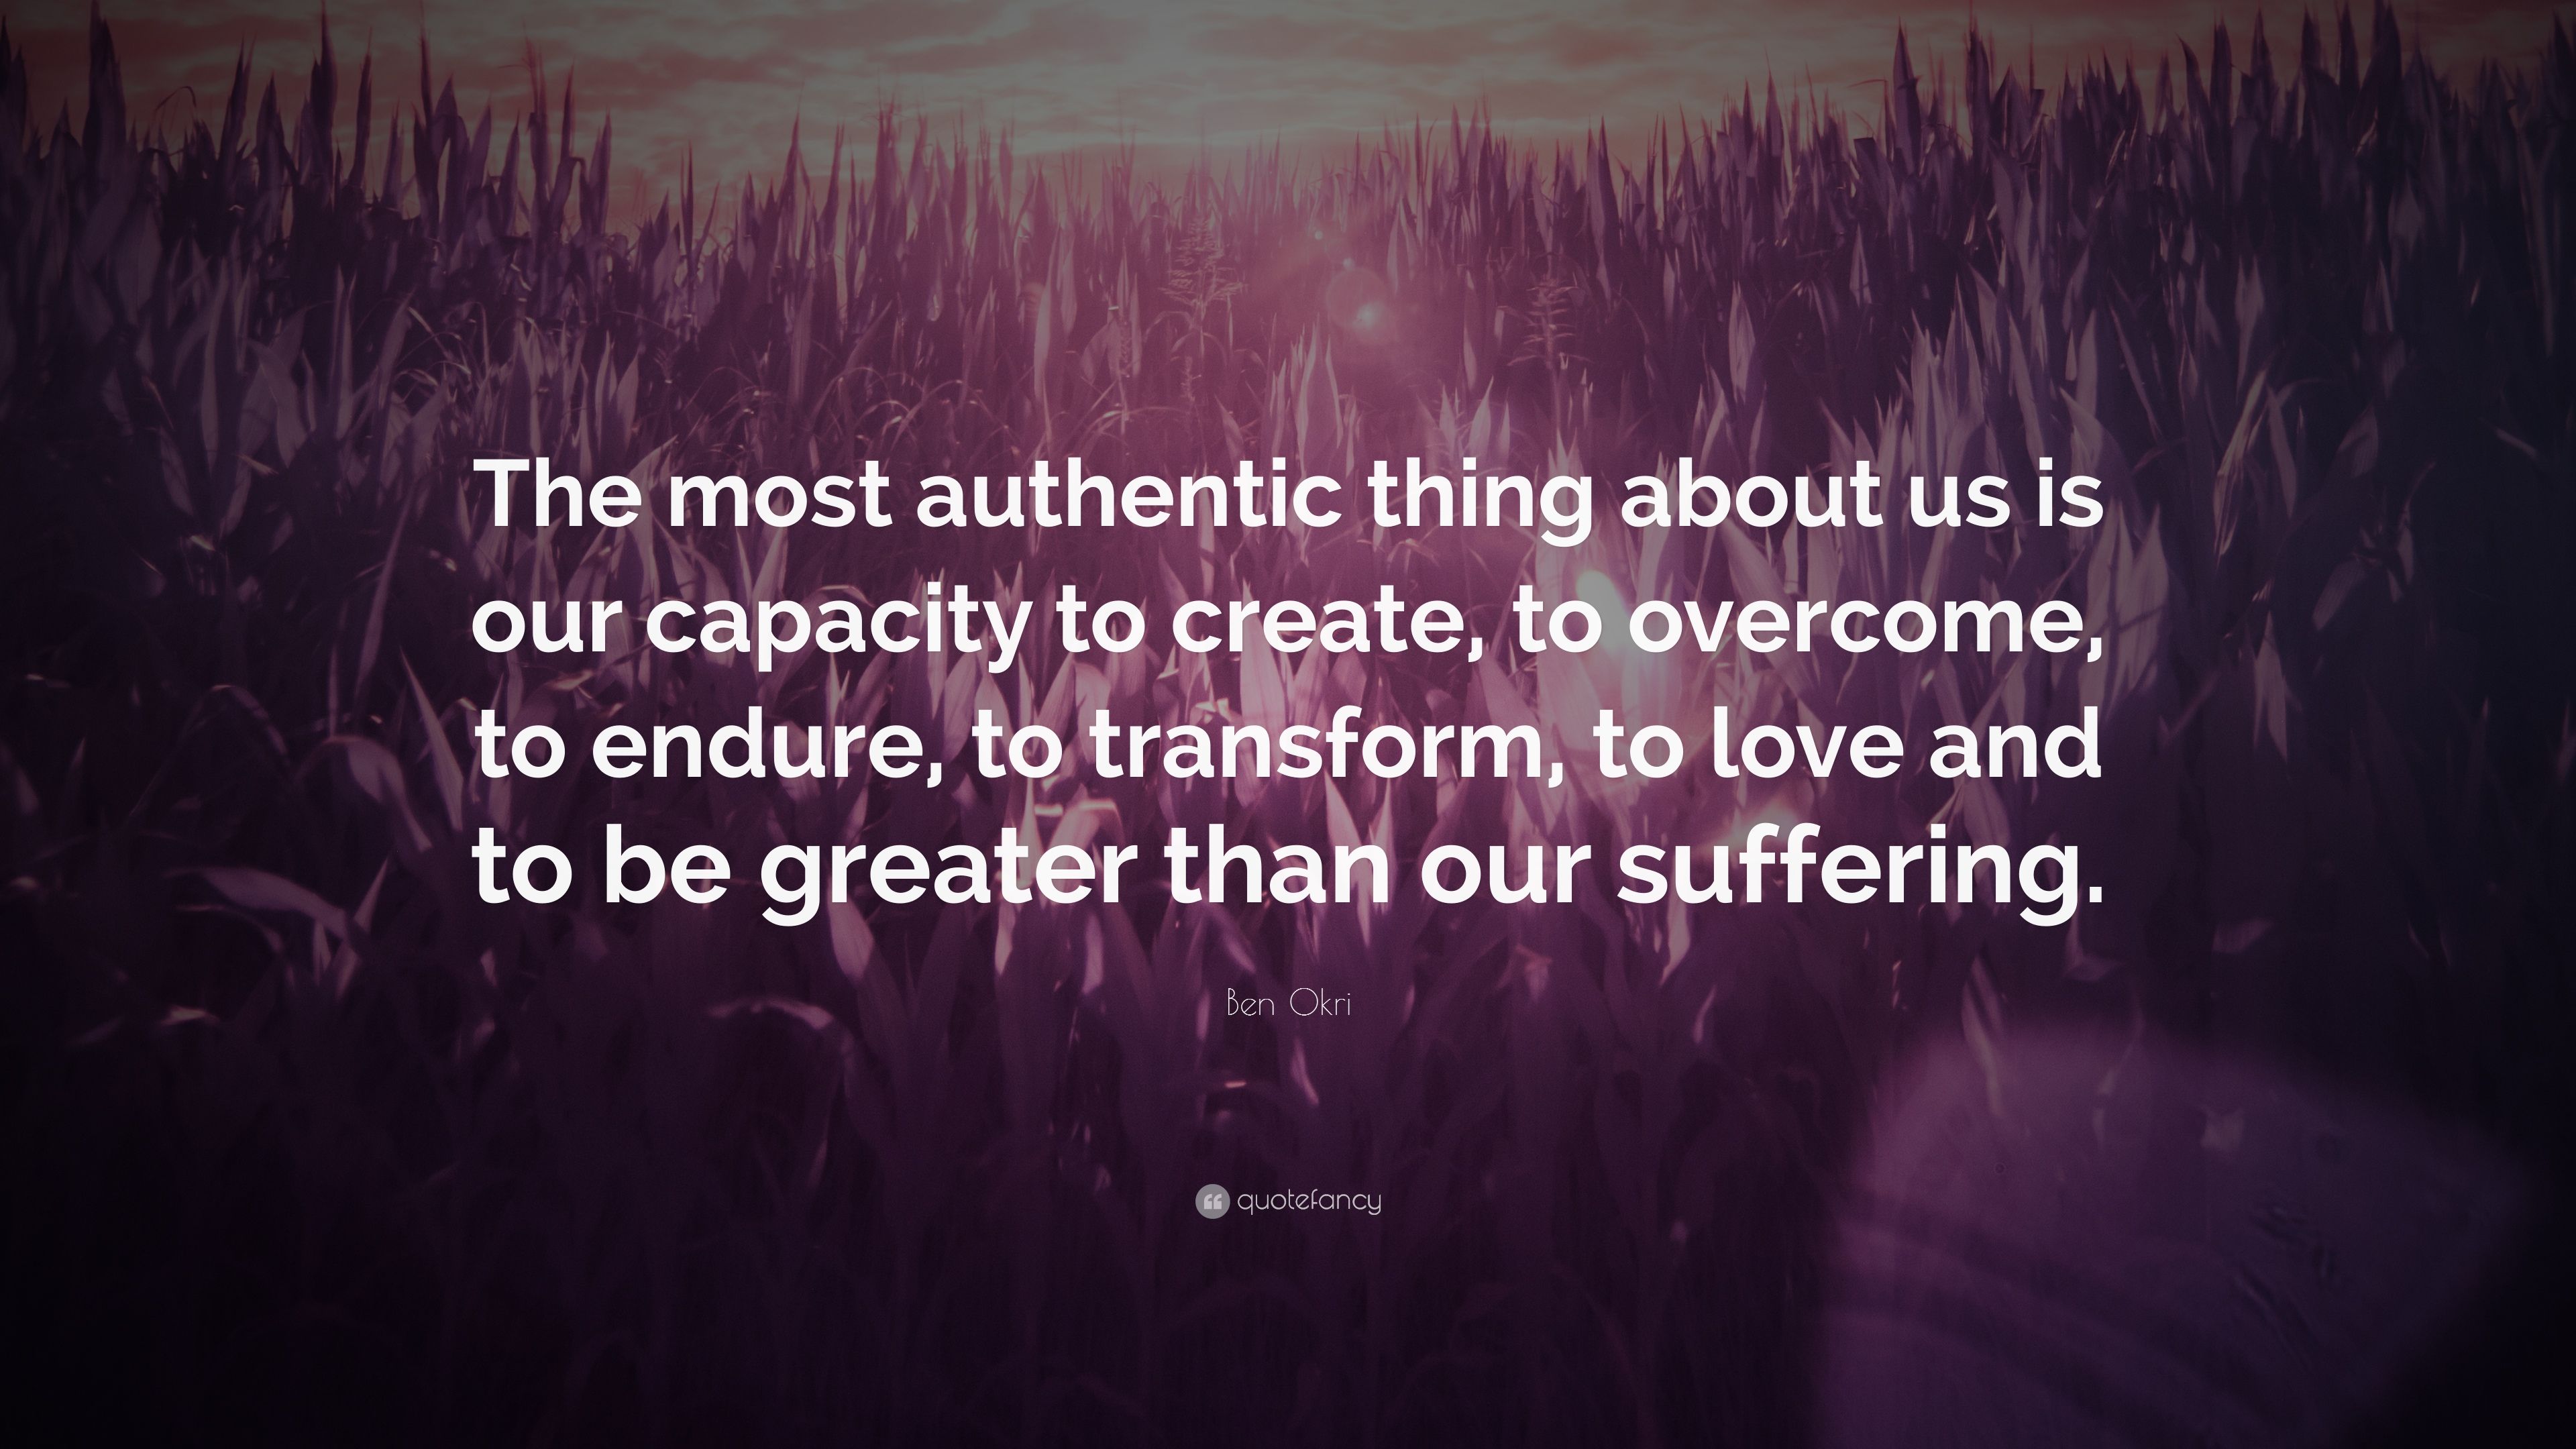 Ben Okri Quote: “The most authentic thing about us is our capacity to create, to overcome, to endure, to transform, to love and to be gre.” (22 wallpaper)